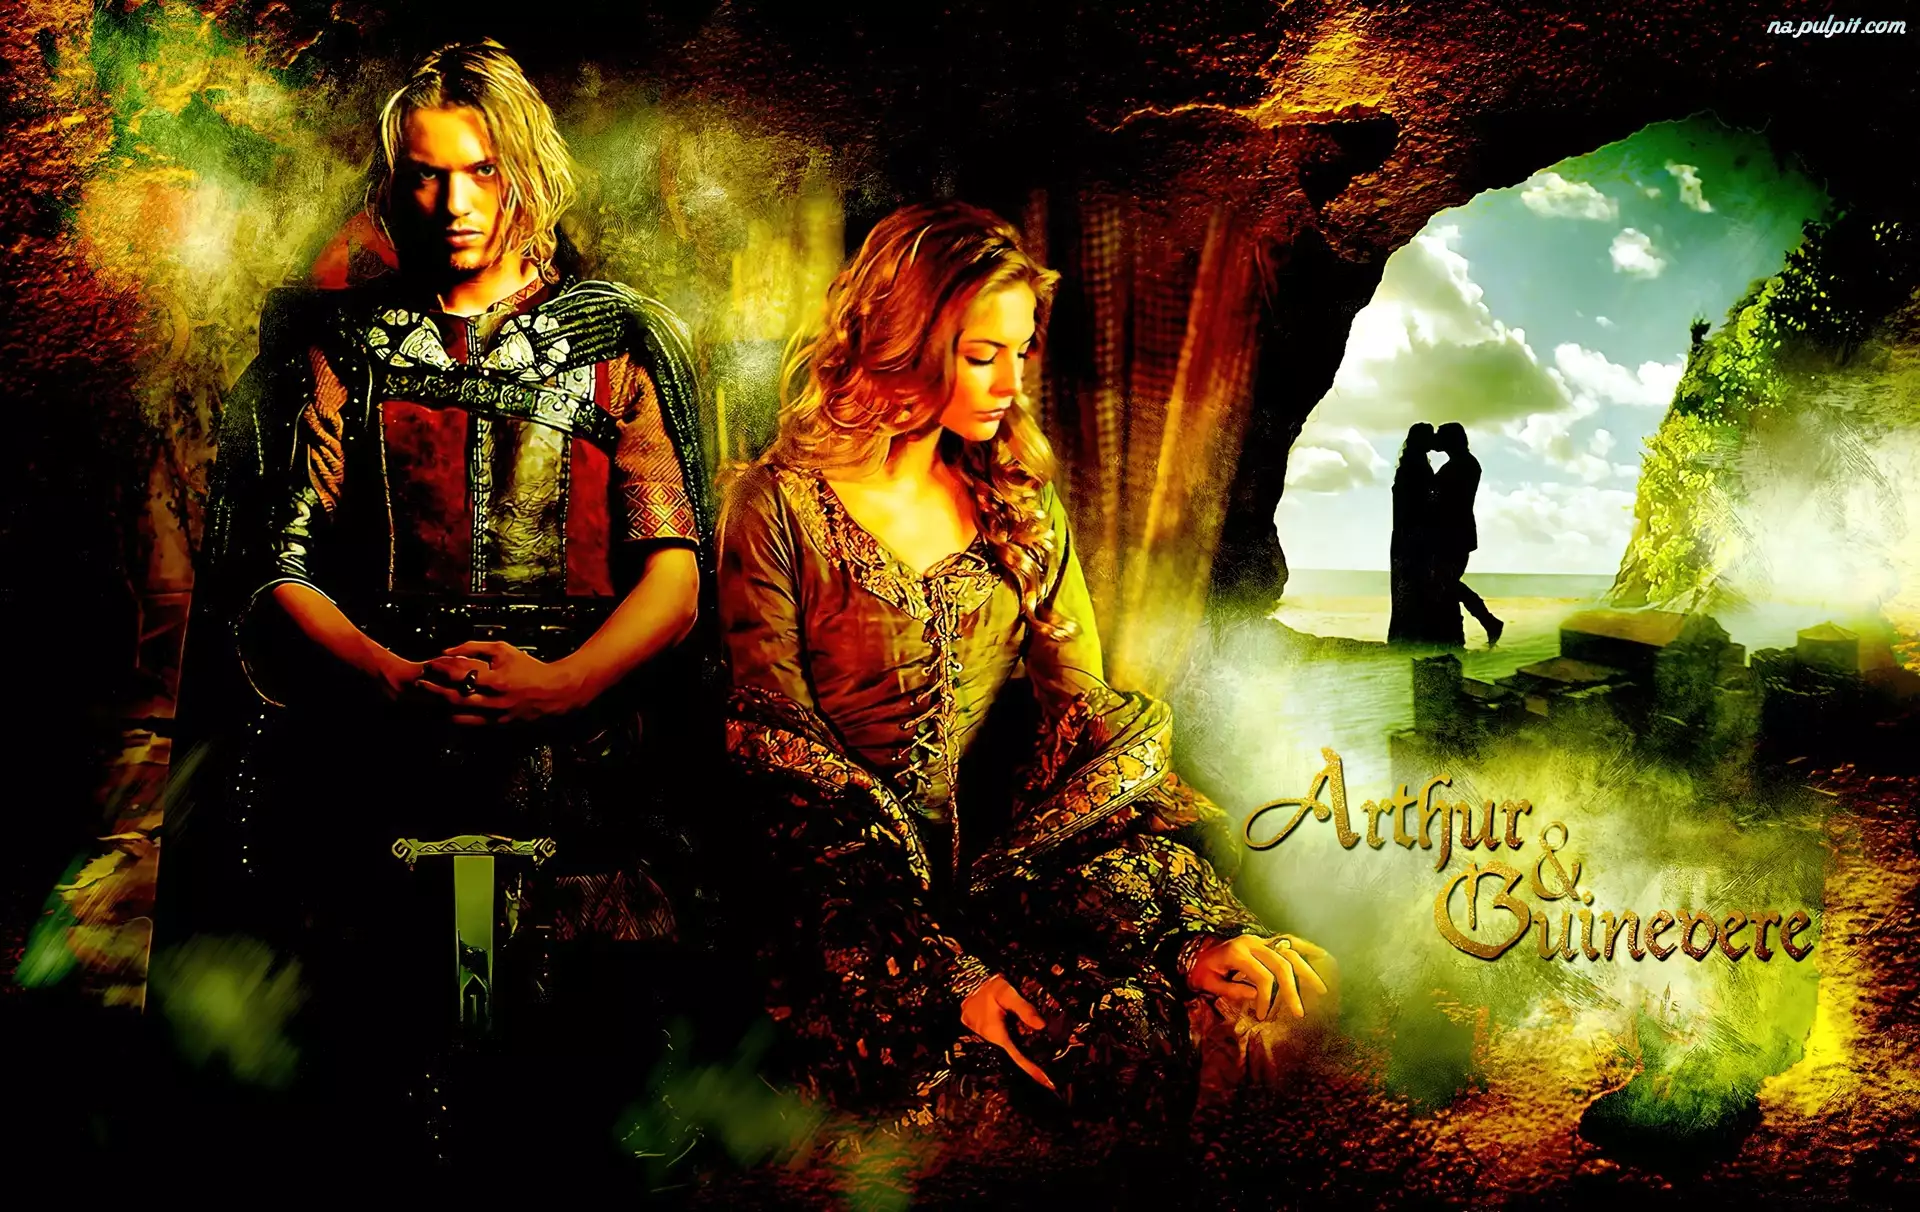 Tamsin Egerton, Serial, Camelot, Jamie Campbell Bower